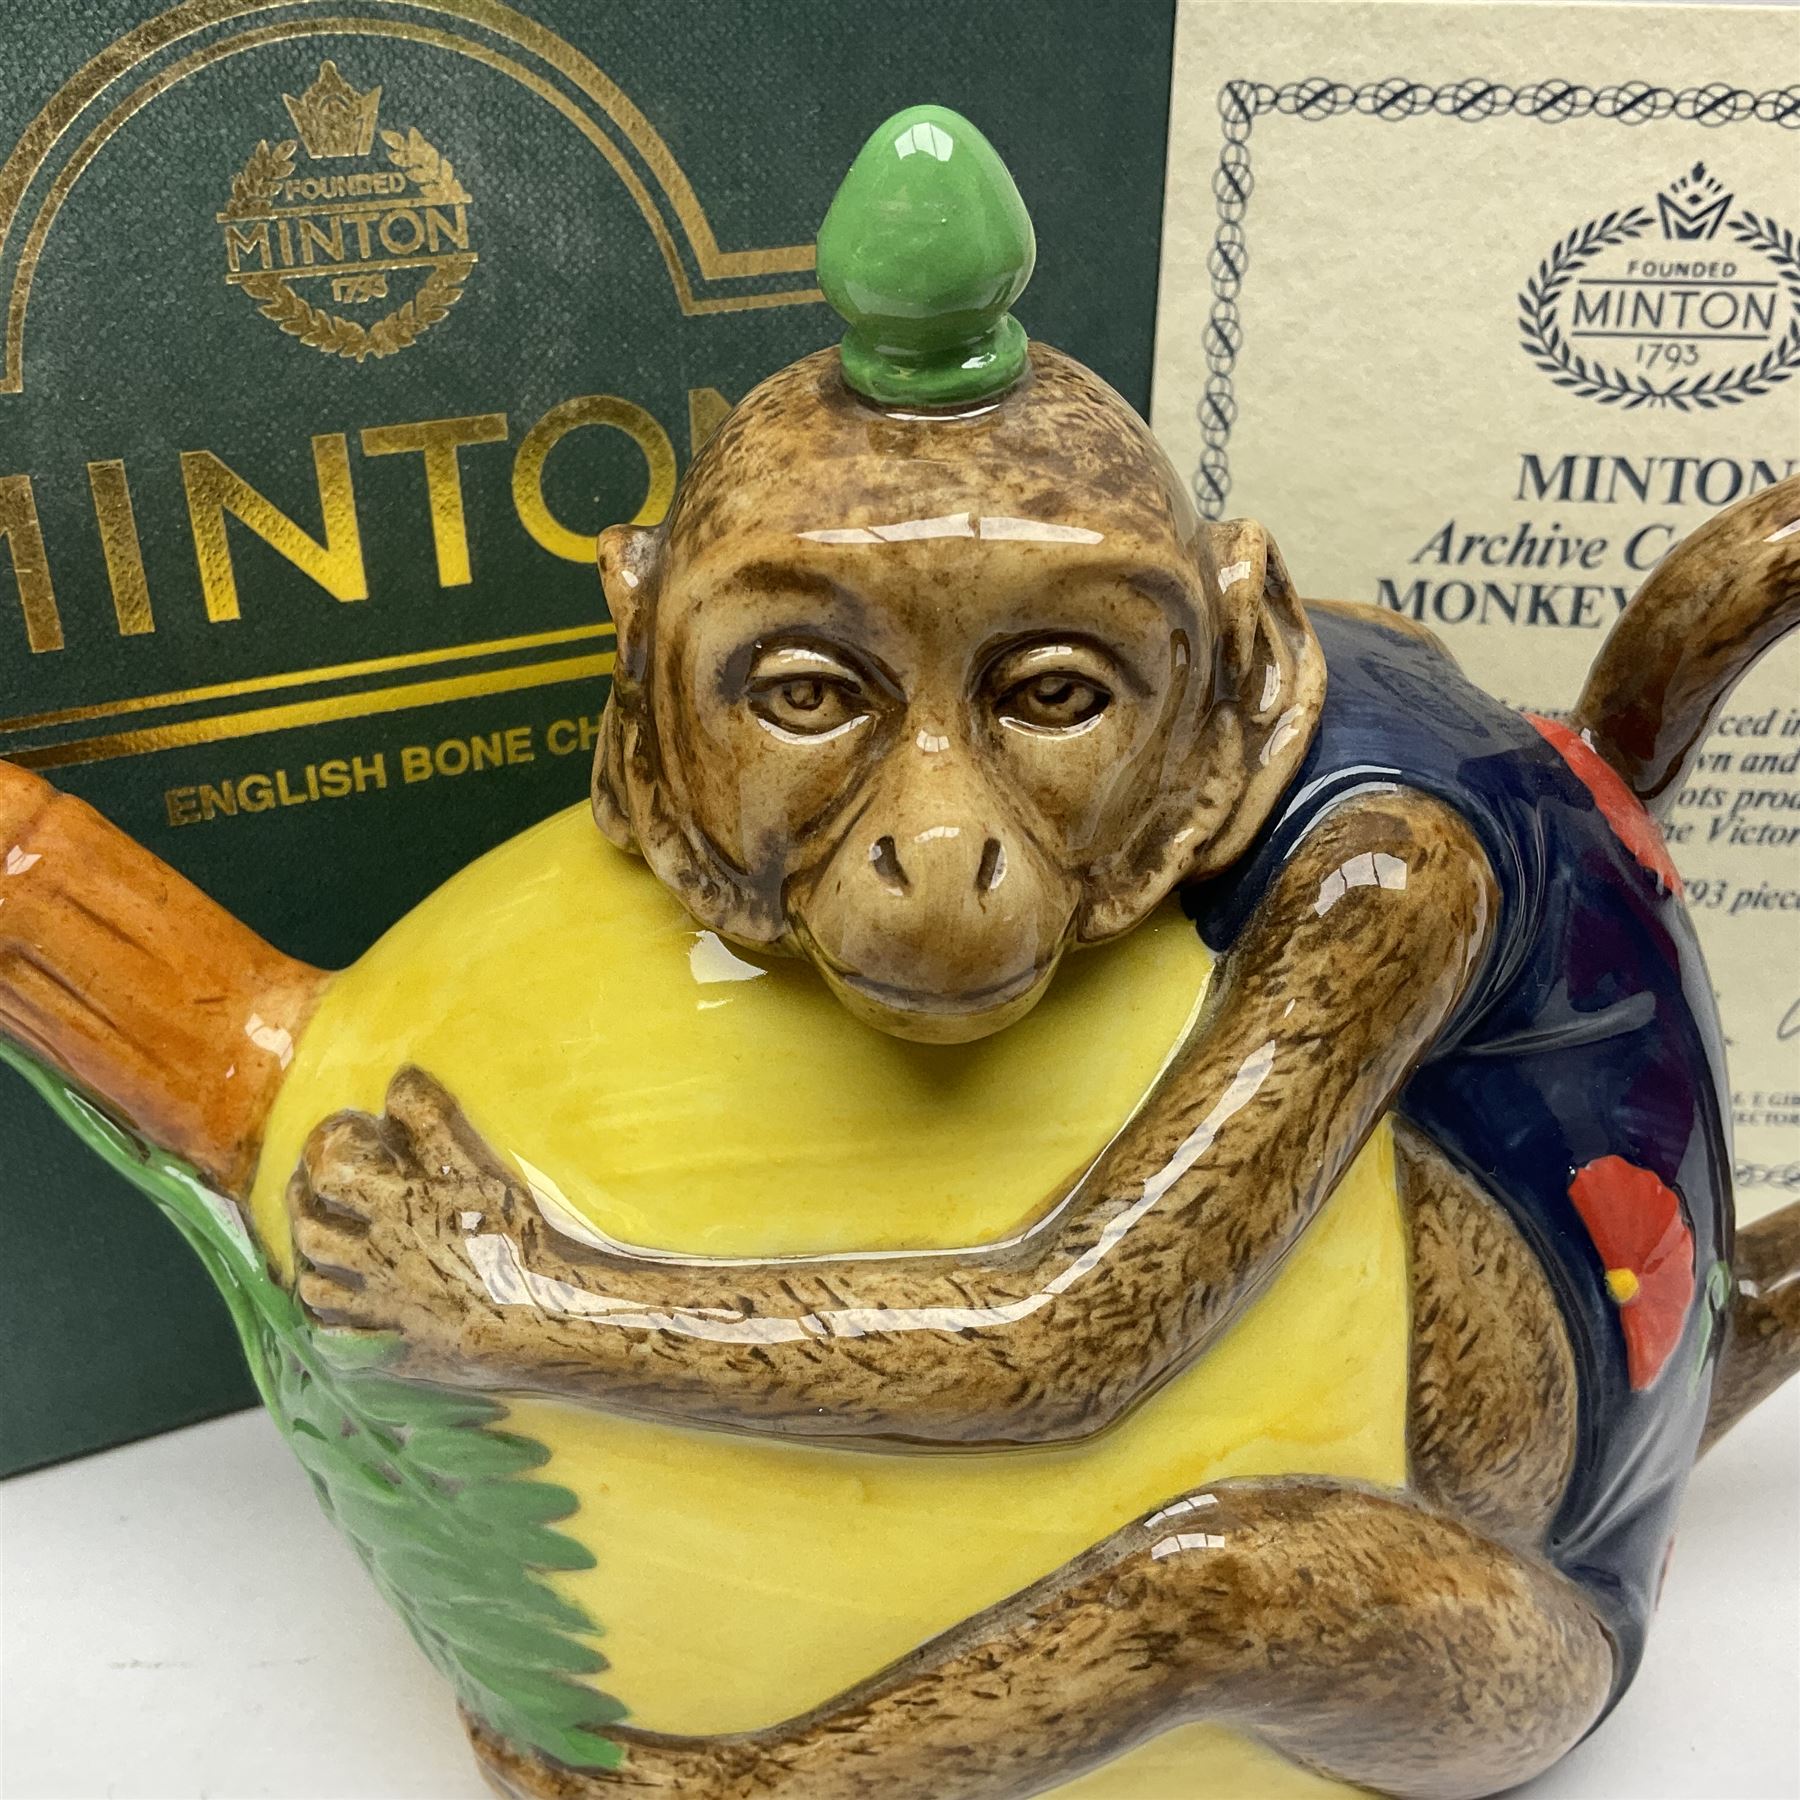 Minton Archive collection monkey teapot - Image 2 of 9